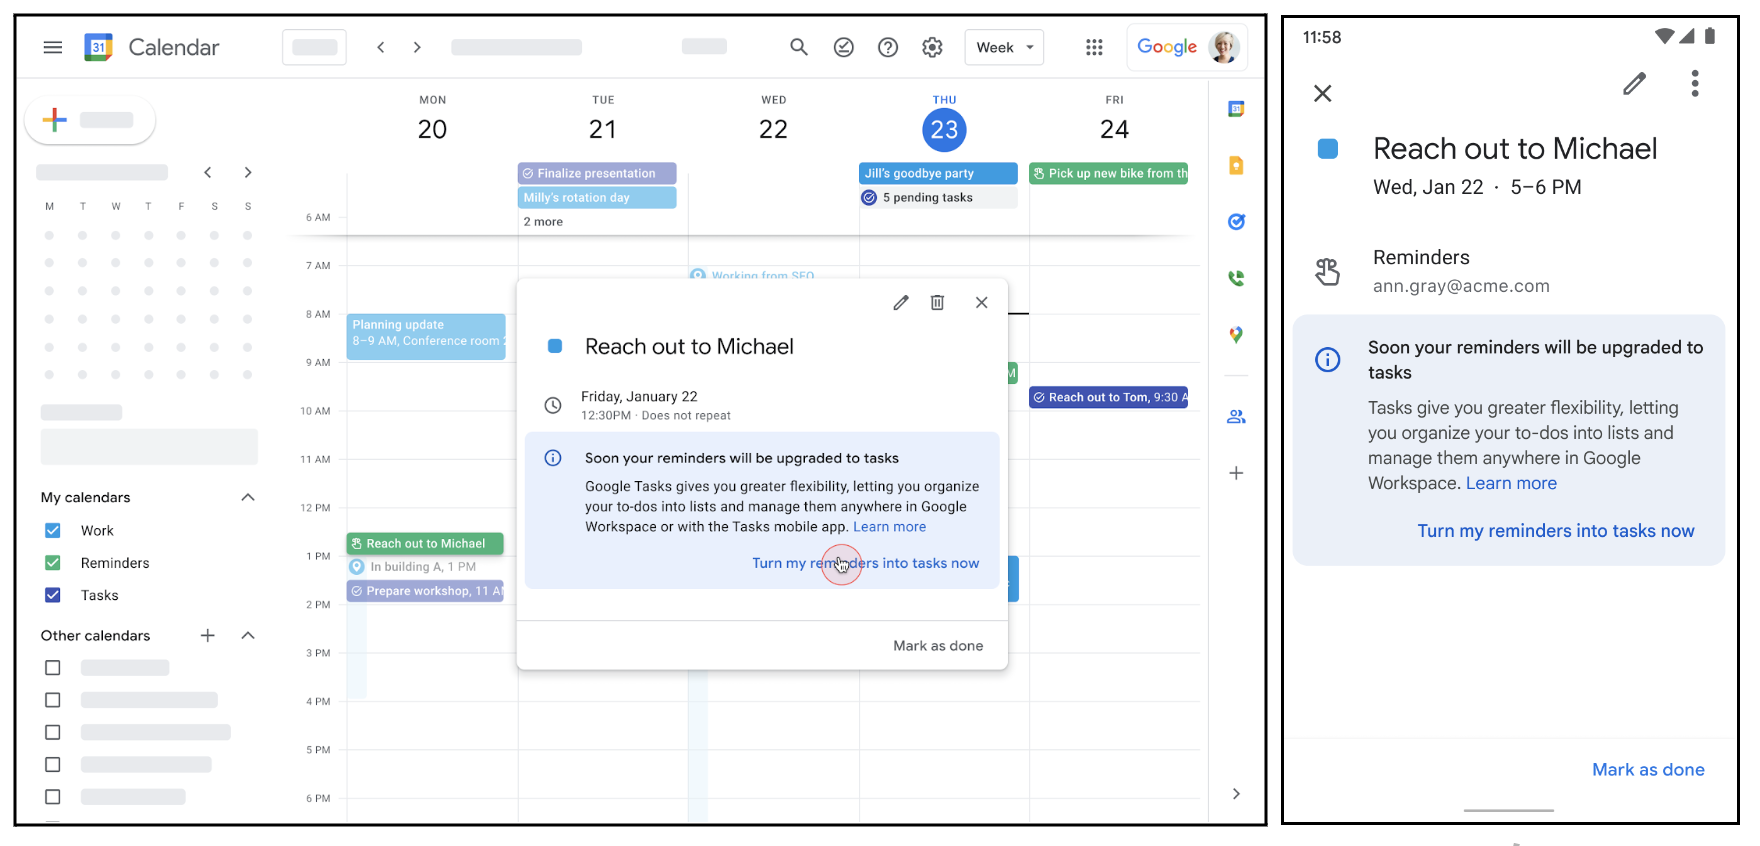 A reminder event is open in Google Calendar, there is a large blue box notifying you of the upcoming transition from Reminders to Tasks, and an option to click "Turn my reminders into tasks now"